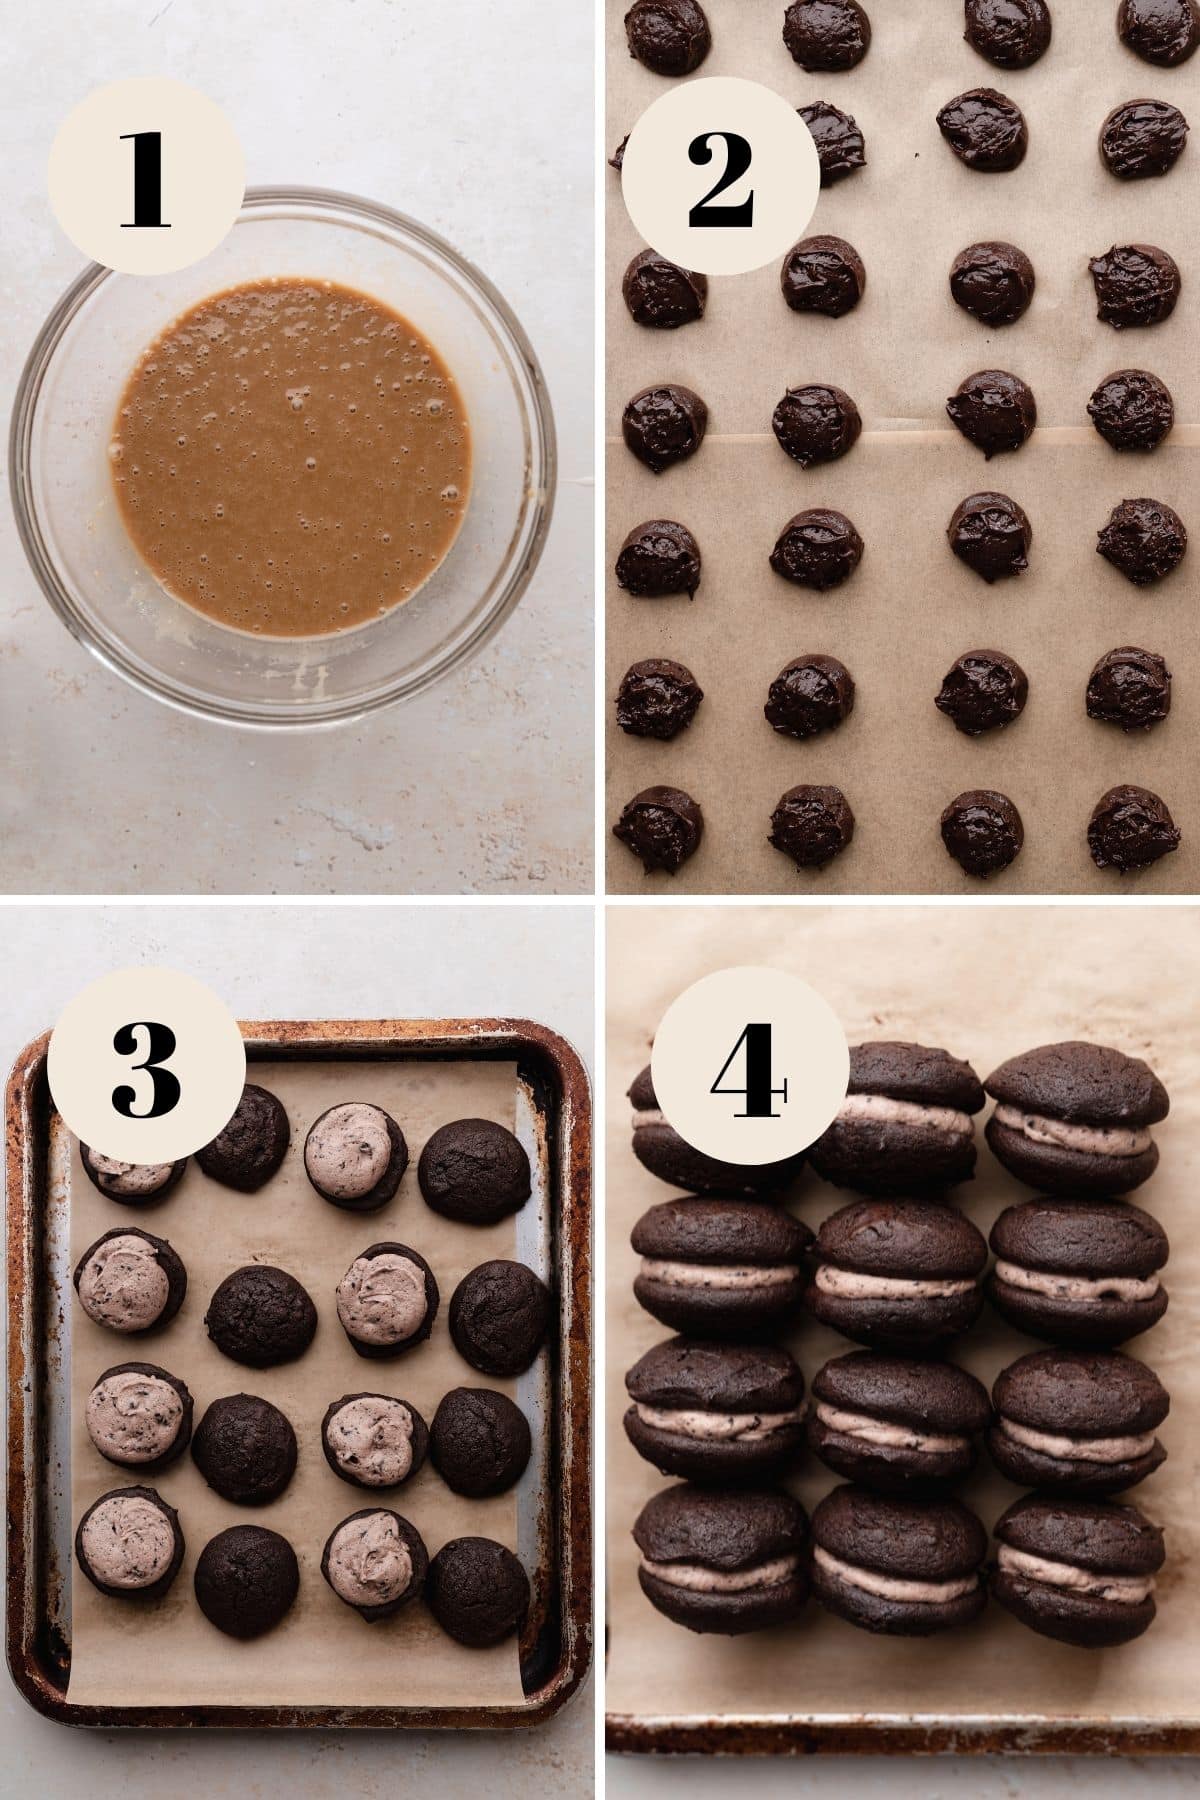 oreo whoopie pie recipe steps in a collage.